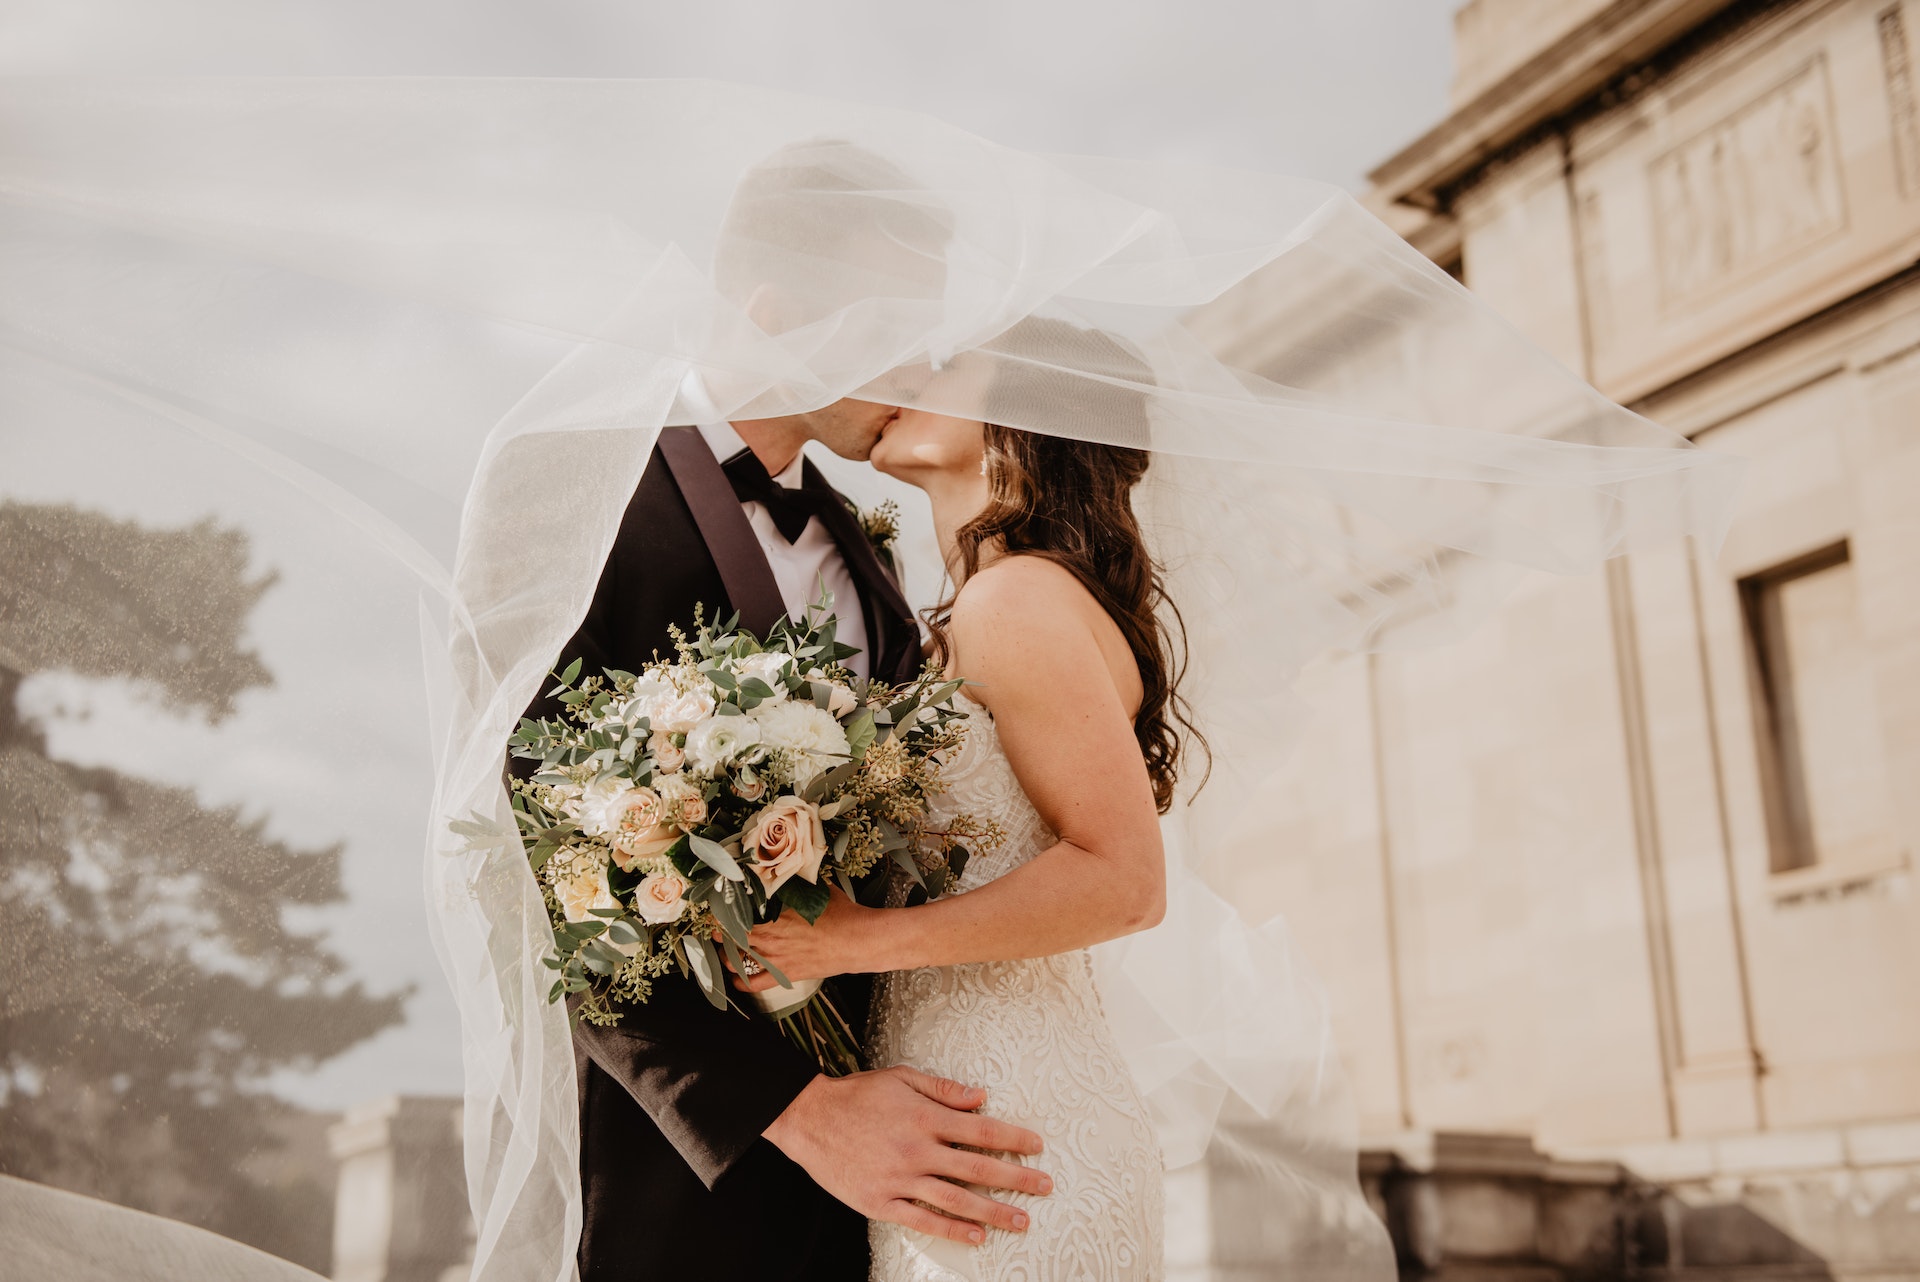 Marriage With Hungarian Woman: Pros And Cons